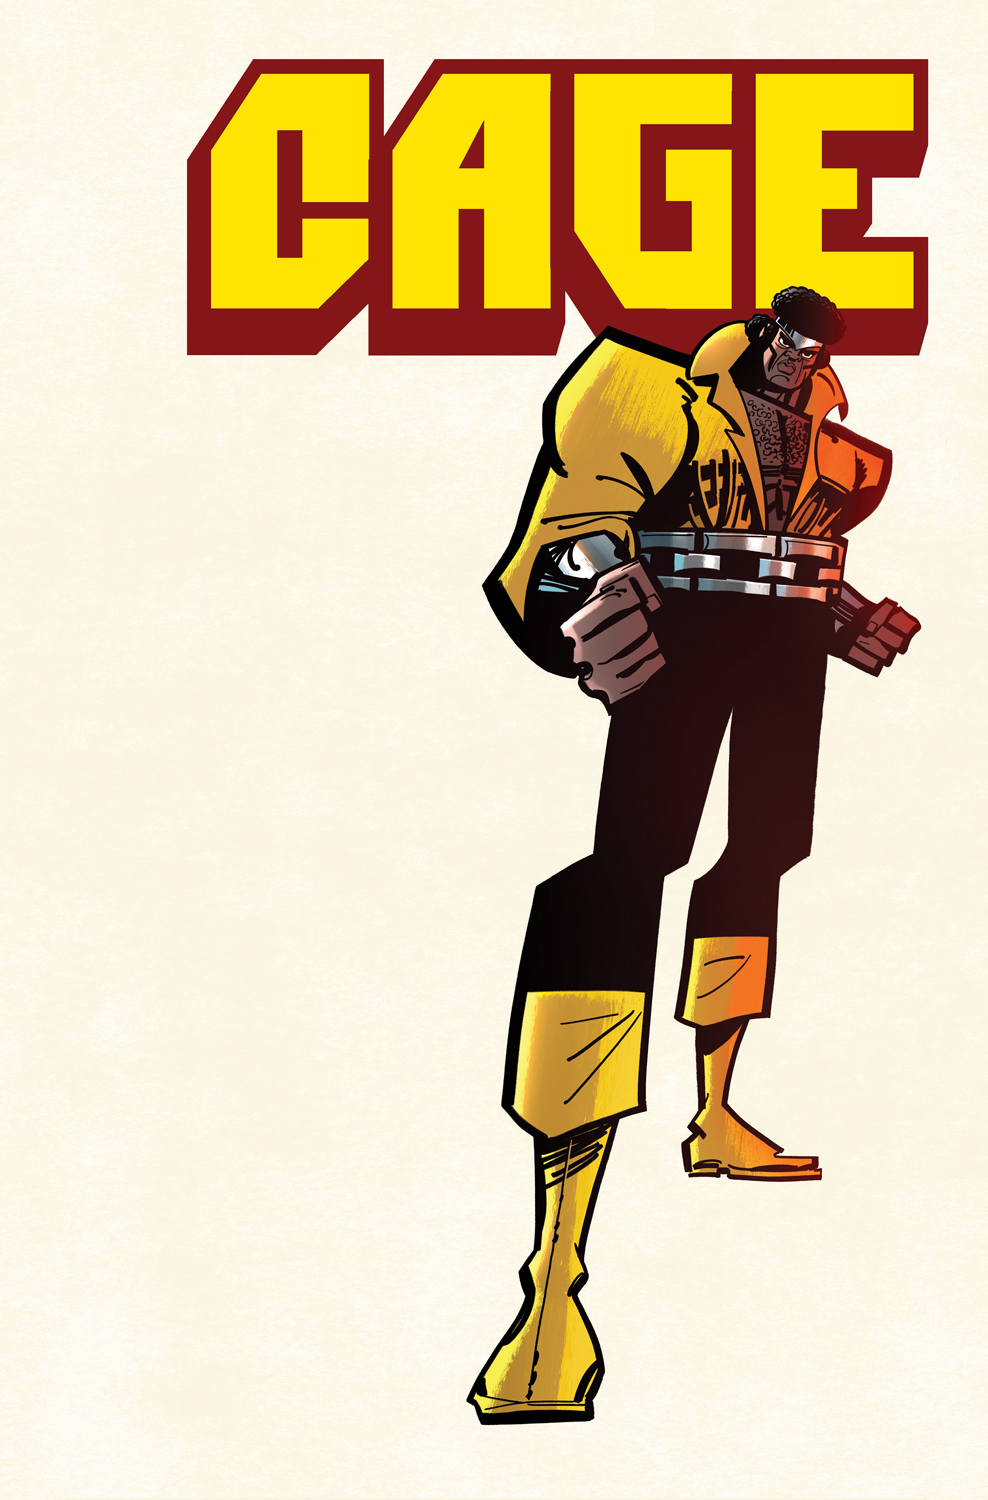 New Luke Cage Series Coming to Marvel